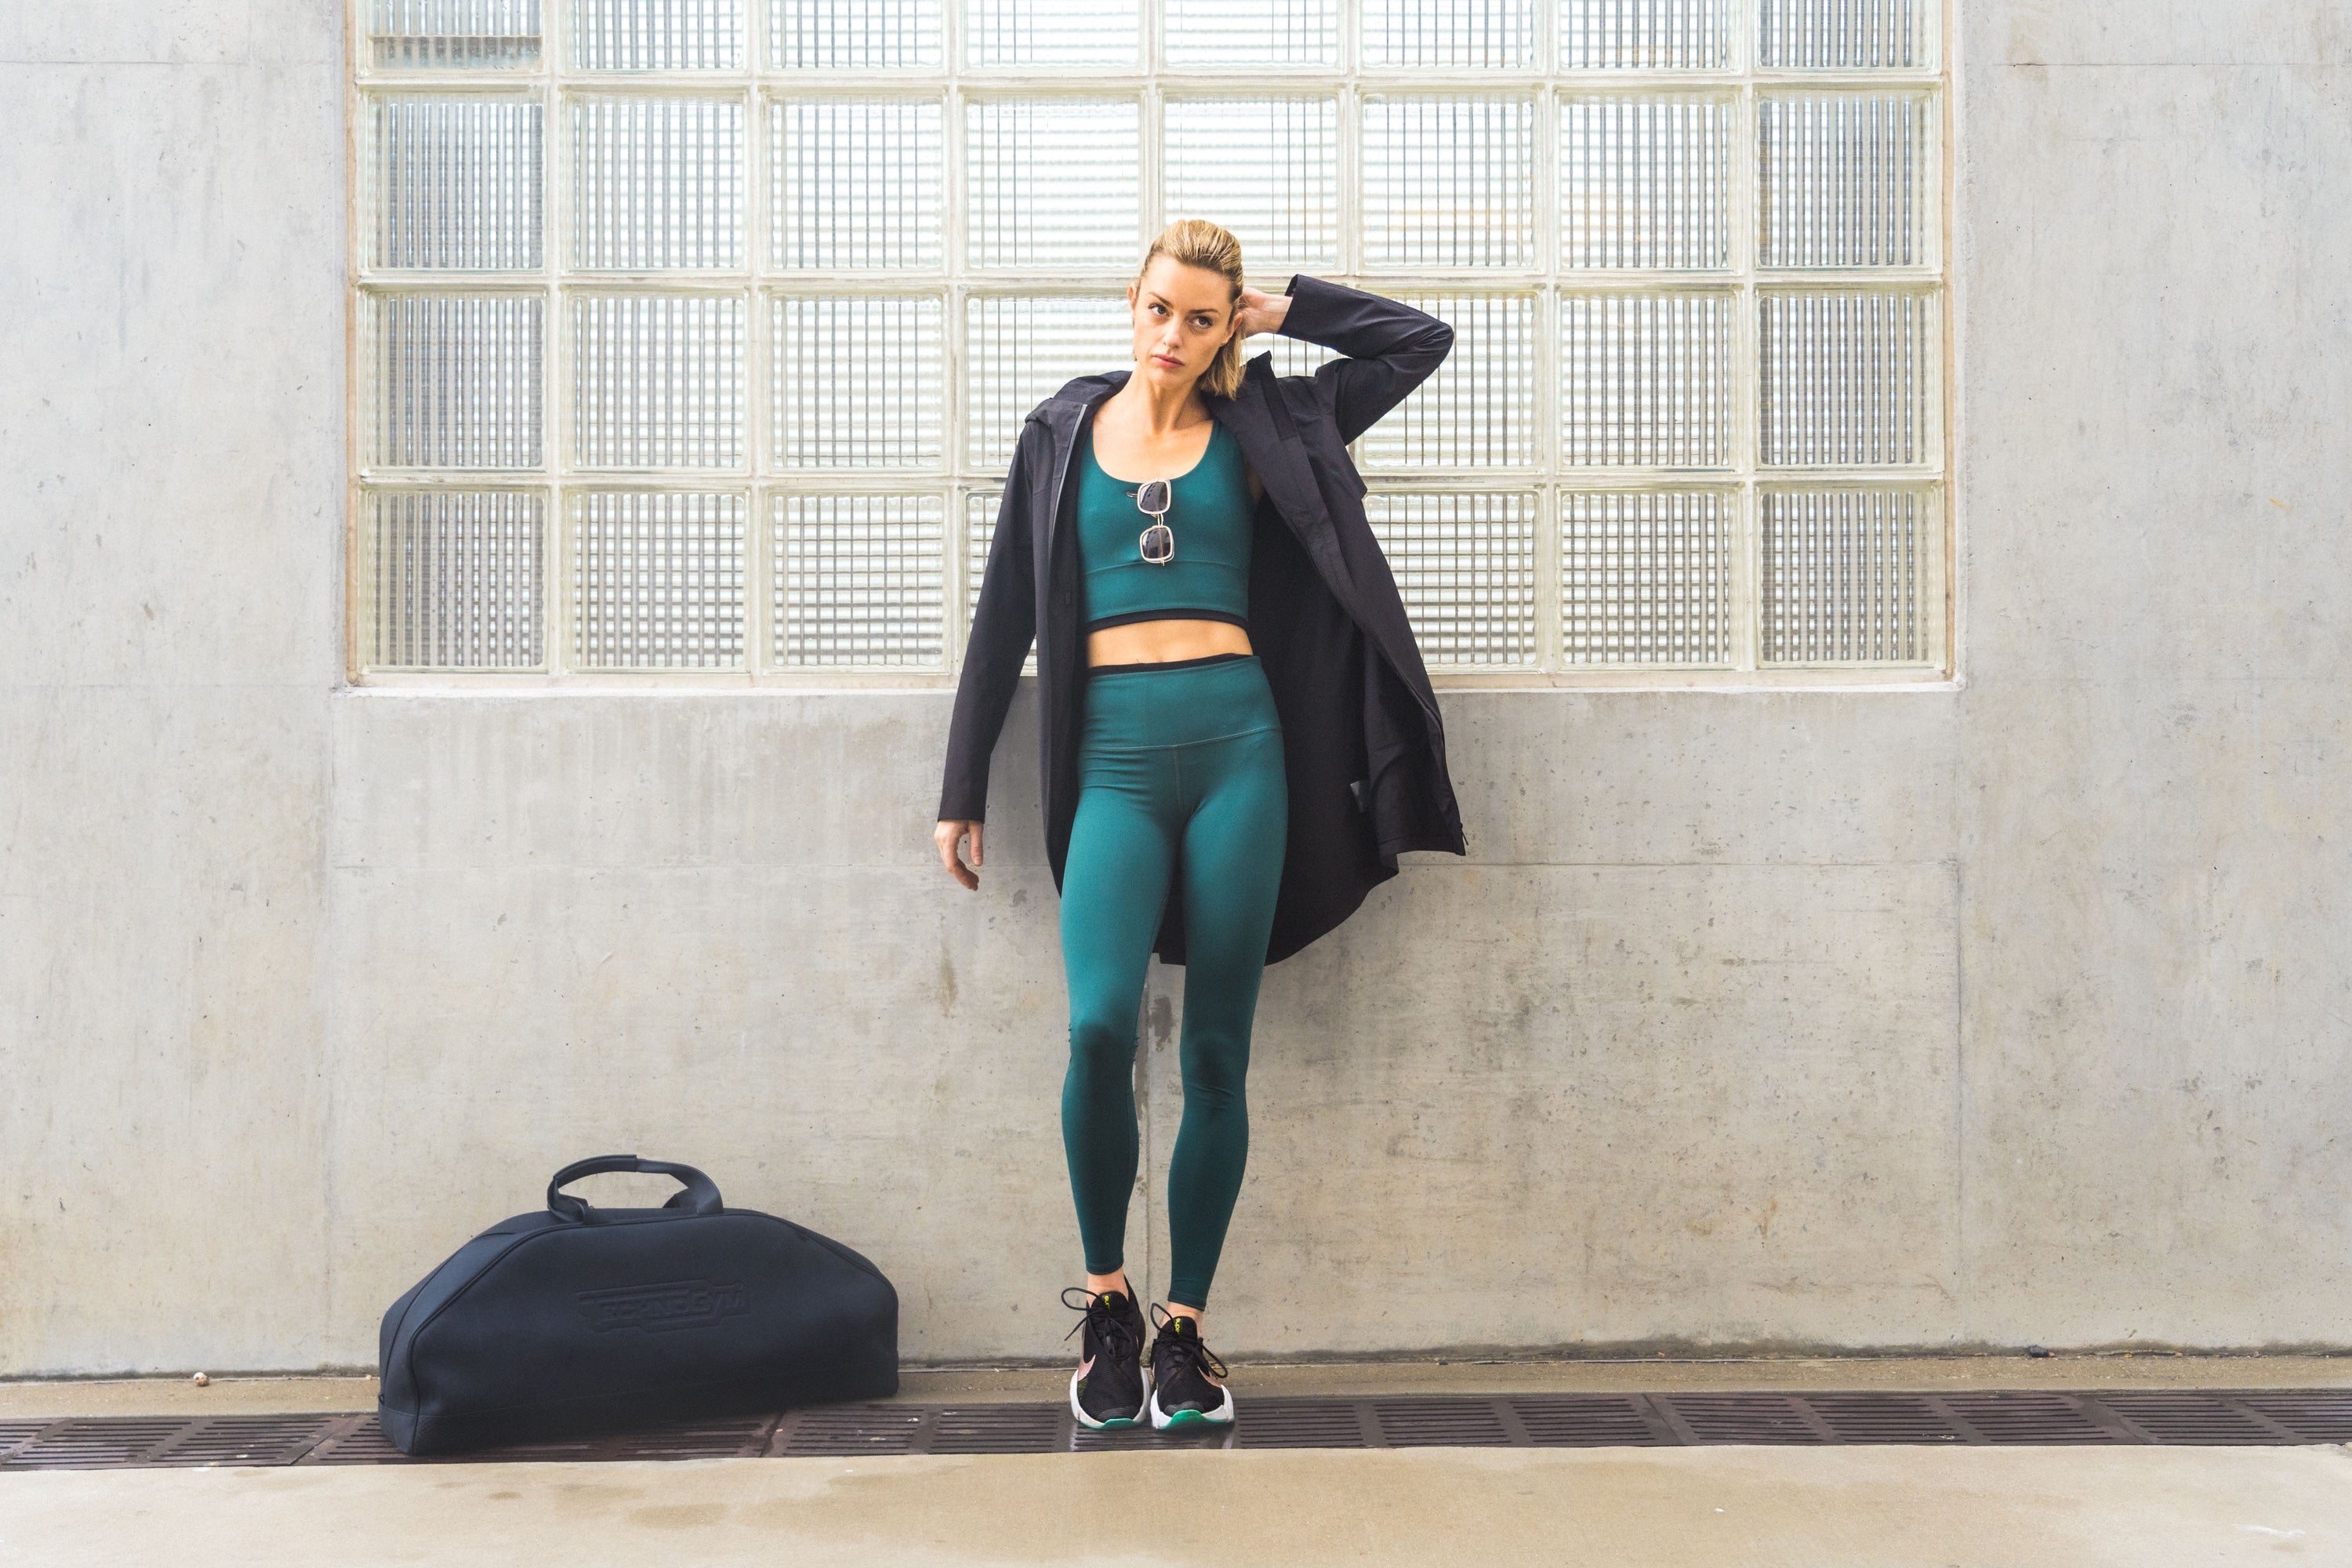 Women leaning against concrete and glass wall in green leggings and bra top. Black jacket, sunglasses hooked into top of bra top with travel bag on the ground.